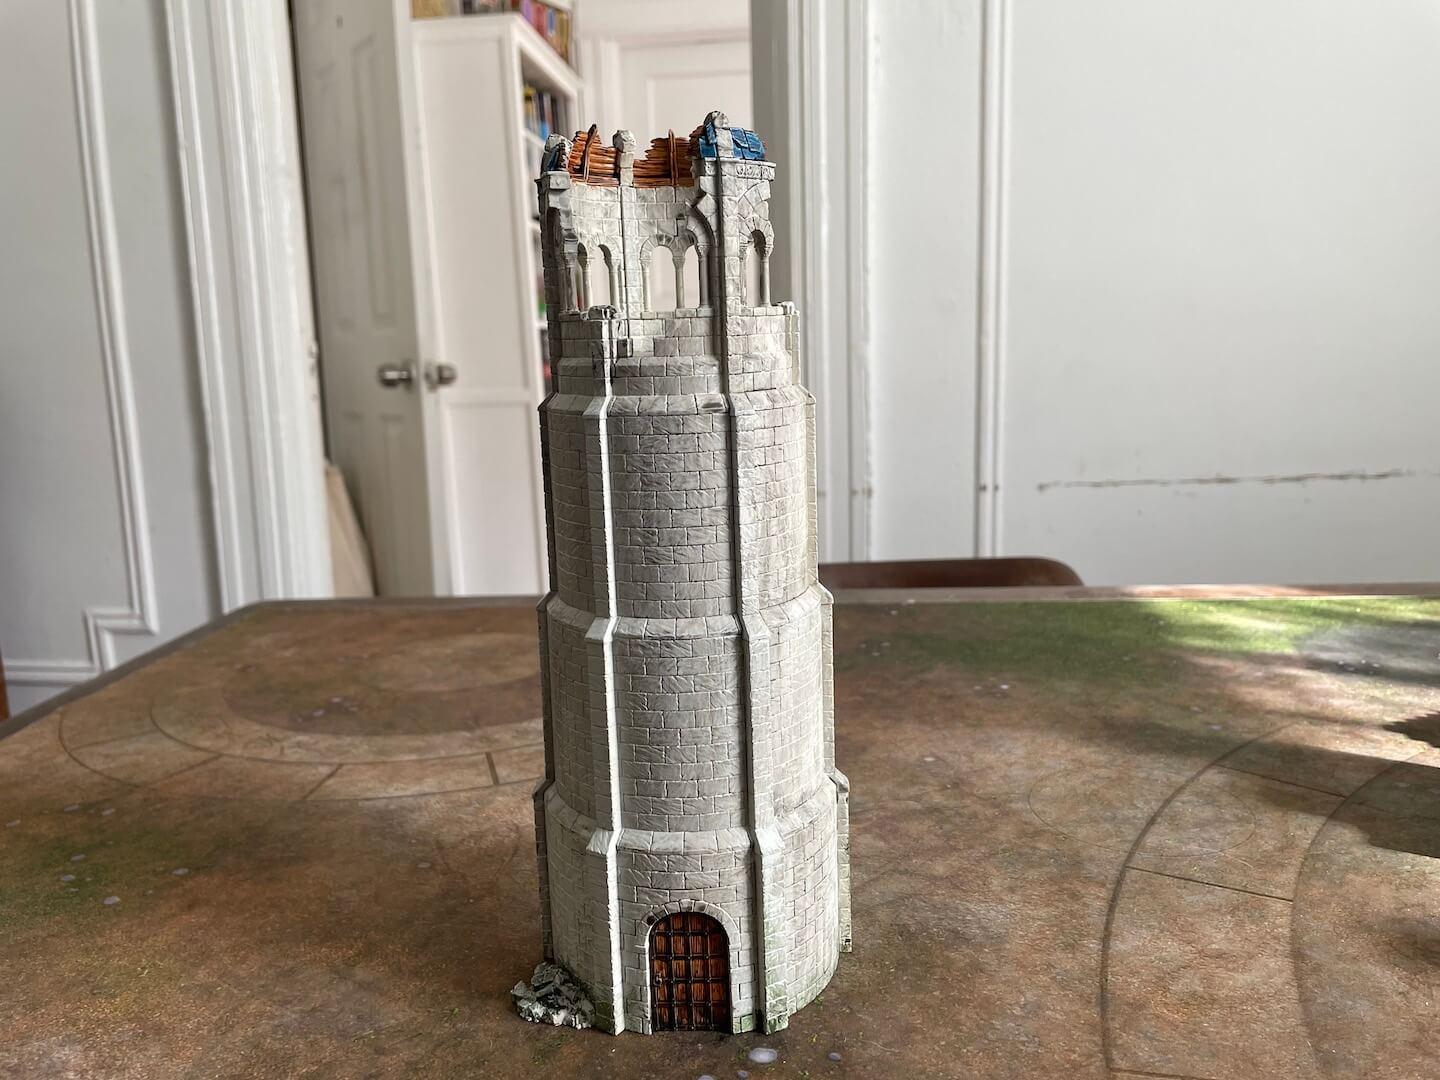 An image of the Games Workshop LOTR terrain Gondor Tower, painted